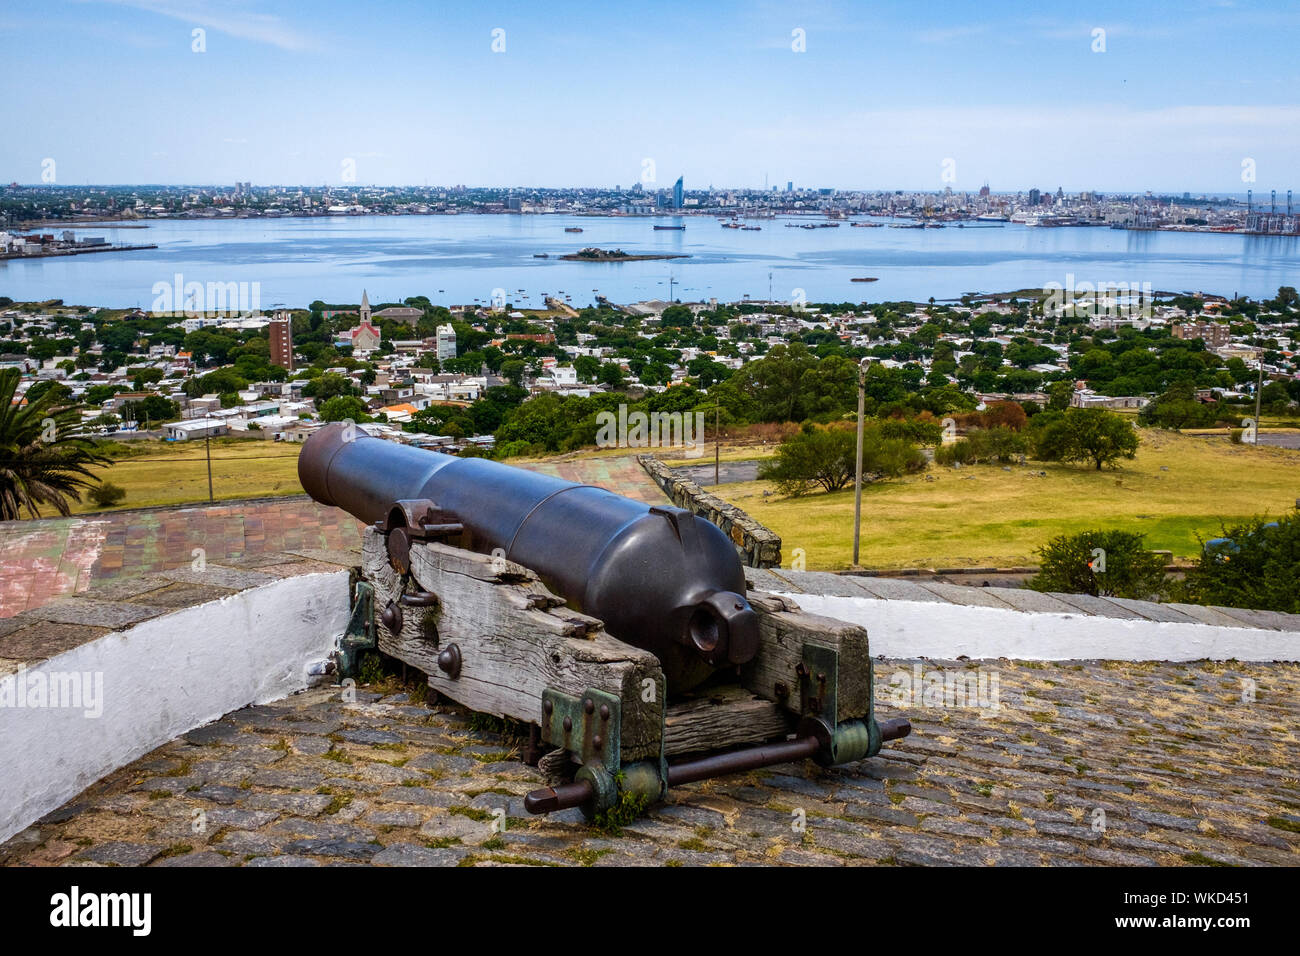 Uruguay, Montevideo: The Cerro Fortress or General Artigas Fortress (Fortaleza General Artigas) overhanging the Bay of Montevideo, housing a museum wi Stock Photo